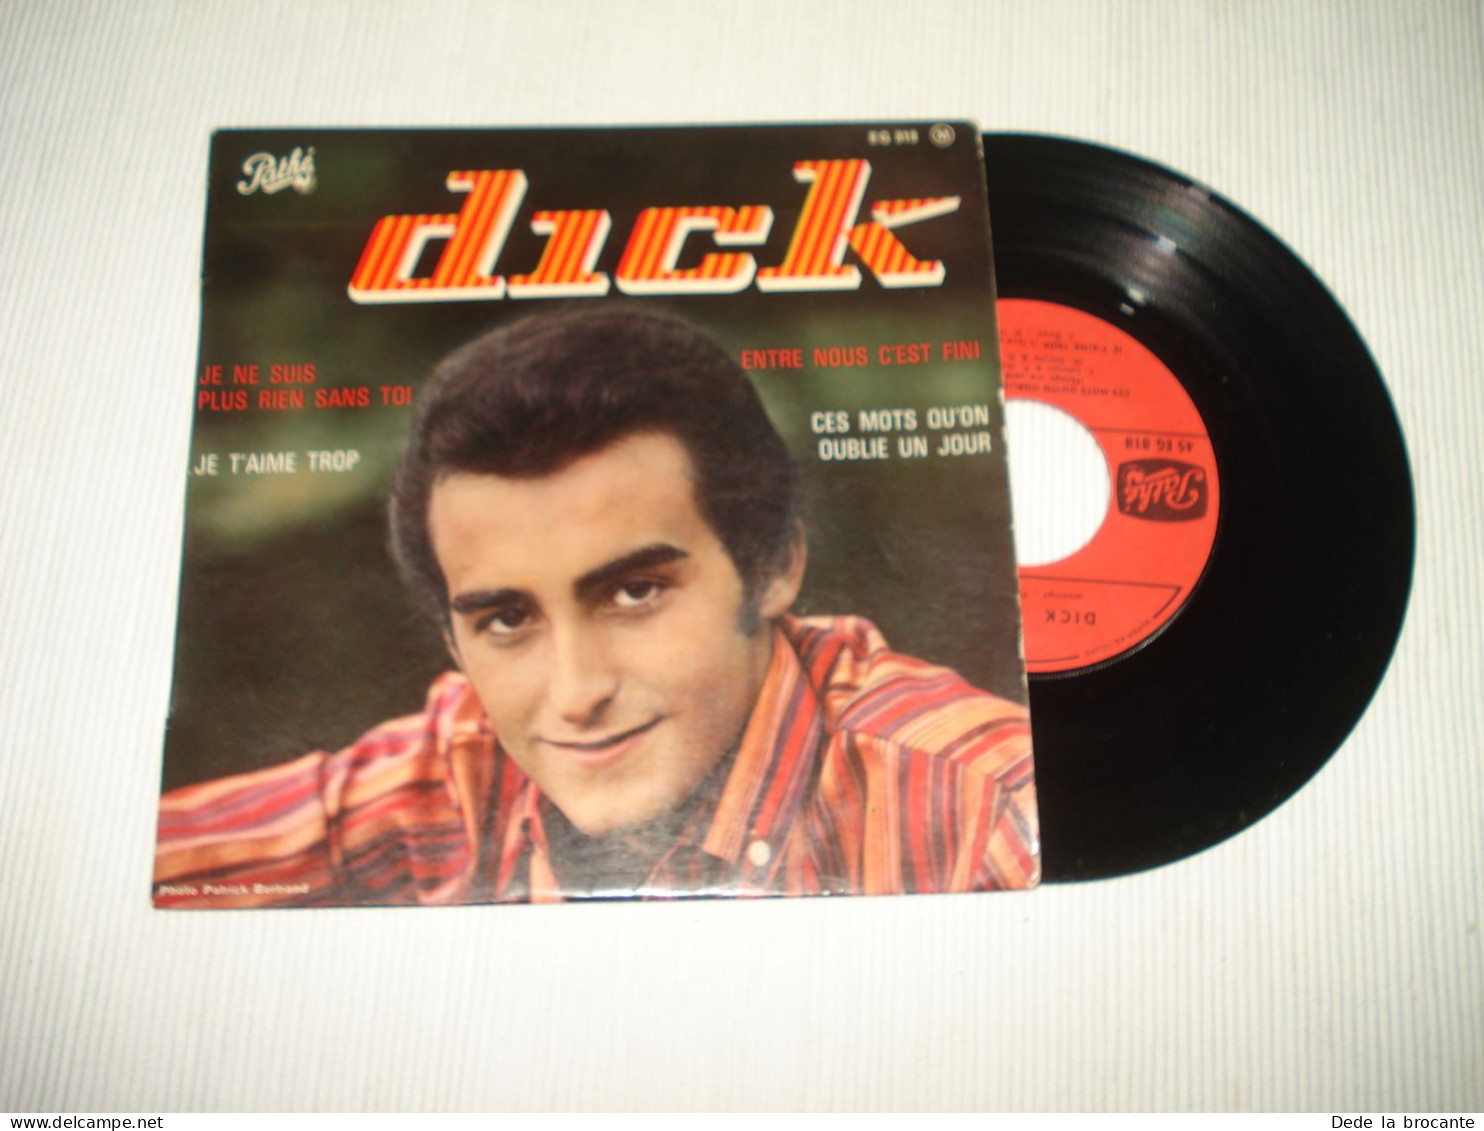 B13 / Dick Rivers – Dick - EP – 	Pathé – EG 818 - Fr 1964  VG+/EX - Speciale Formaten